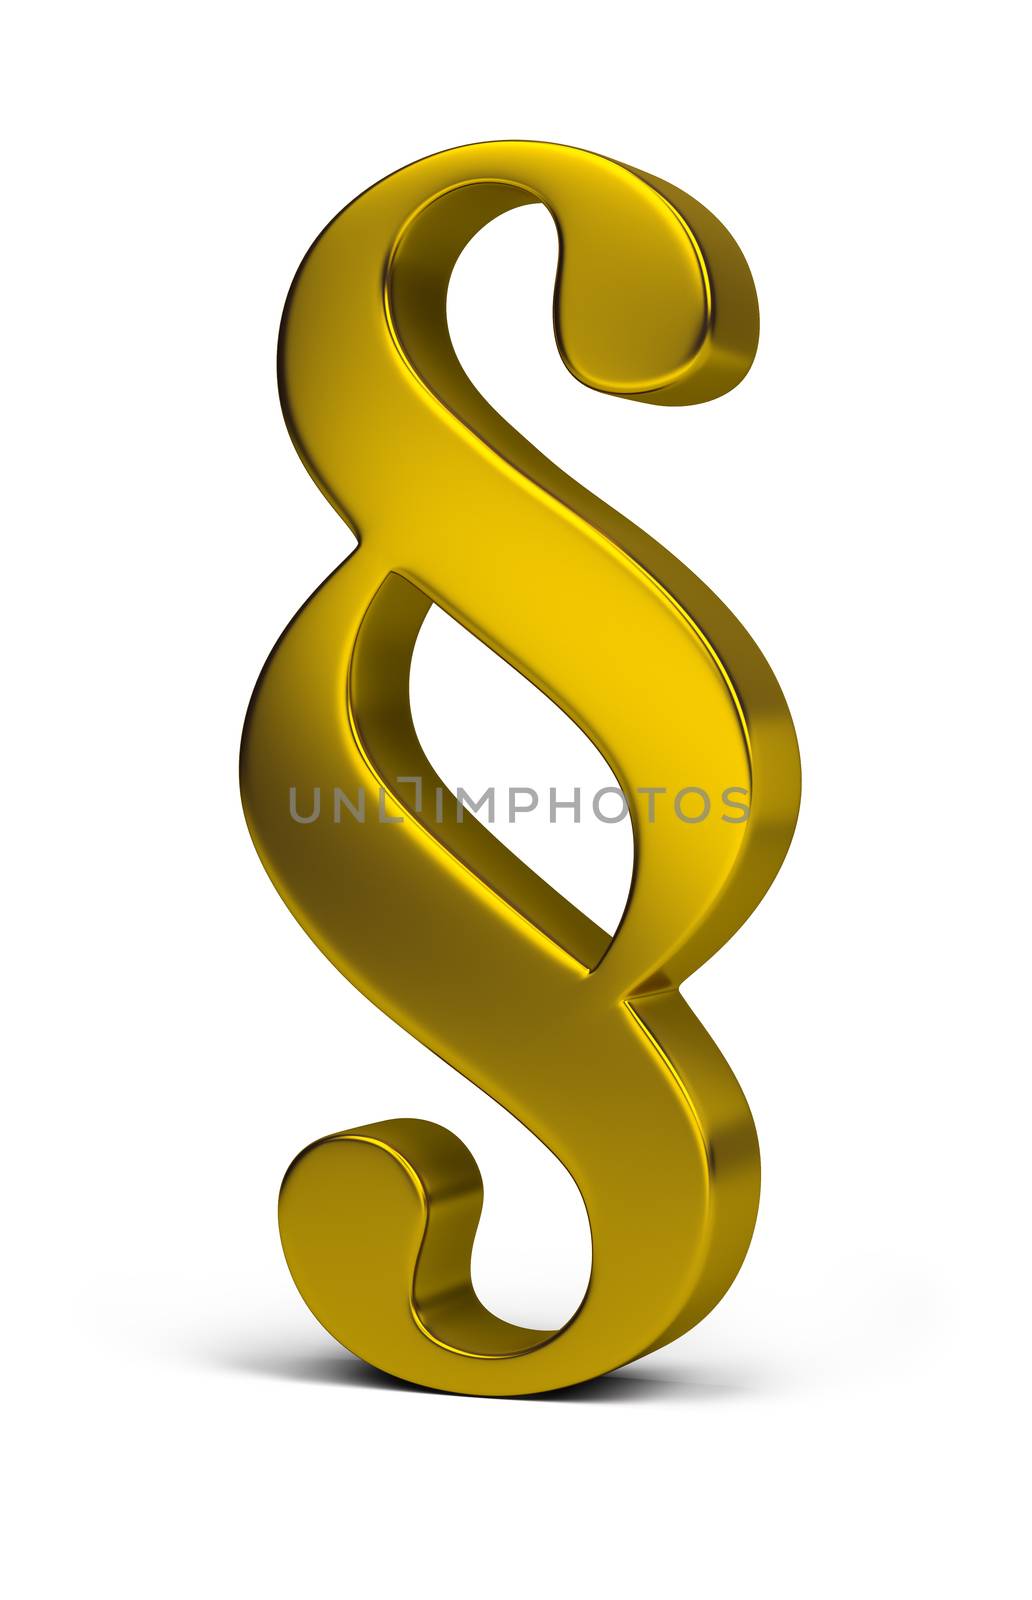 Golden paragraph symbol. 3d image. Isolated white background.